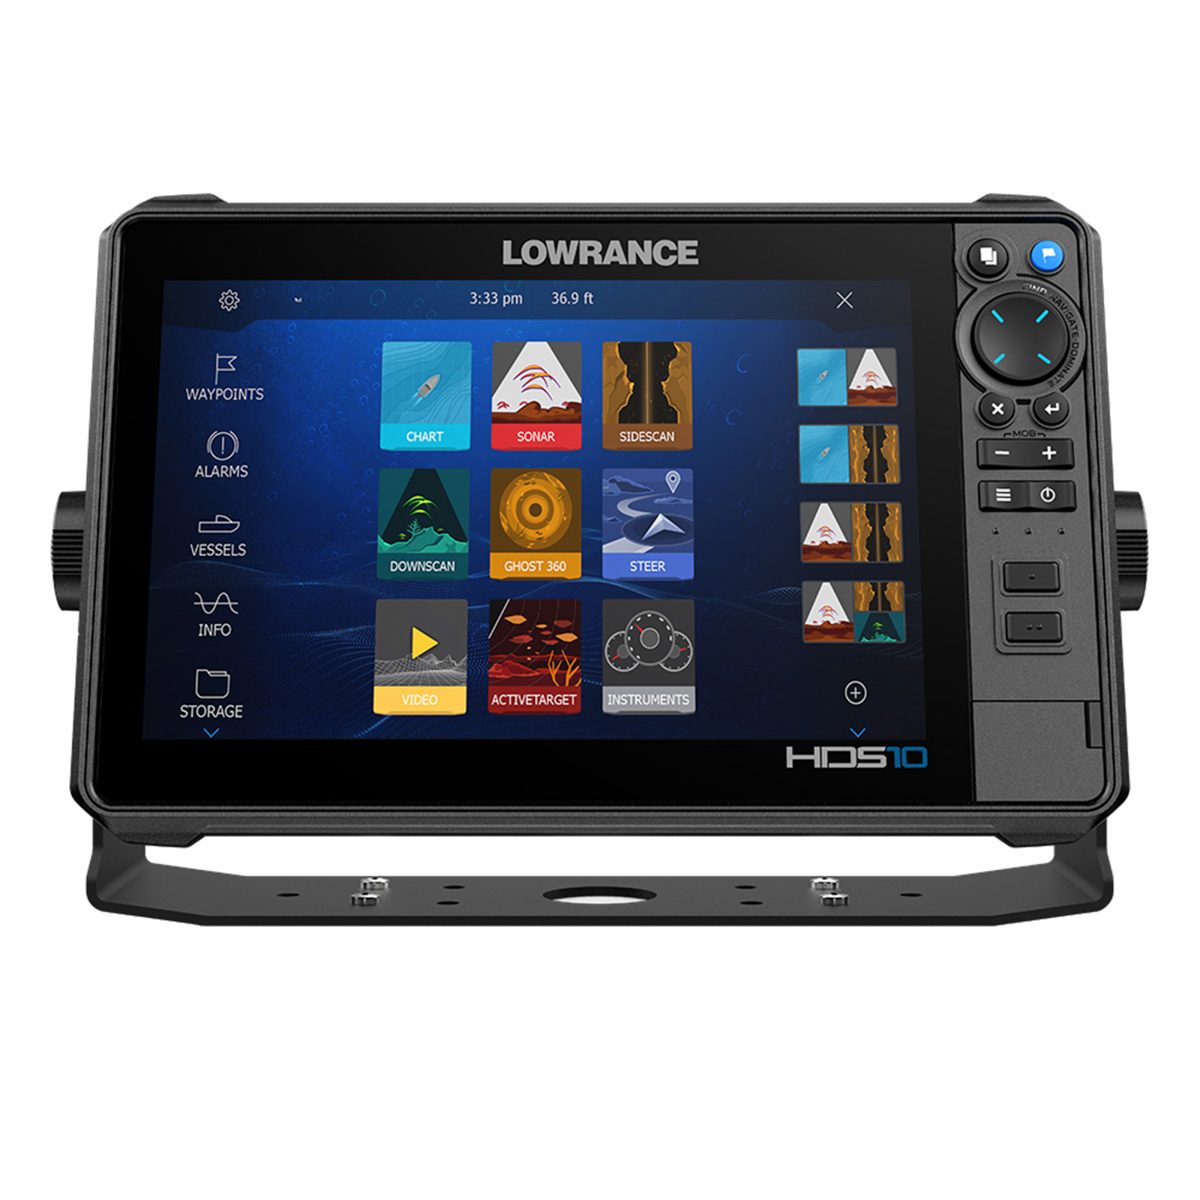 Lowrance HDS PRO 10 Fishfinder Chartplotter with C-MAP Discover OnBoard, No Transducer in White